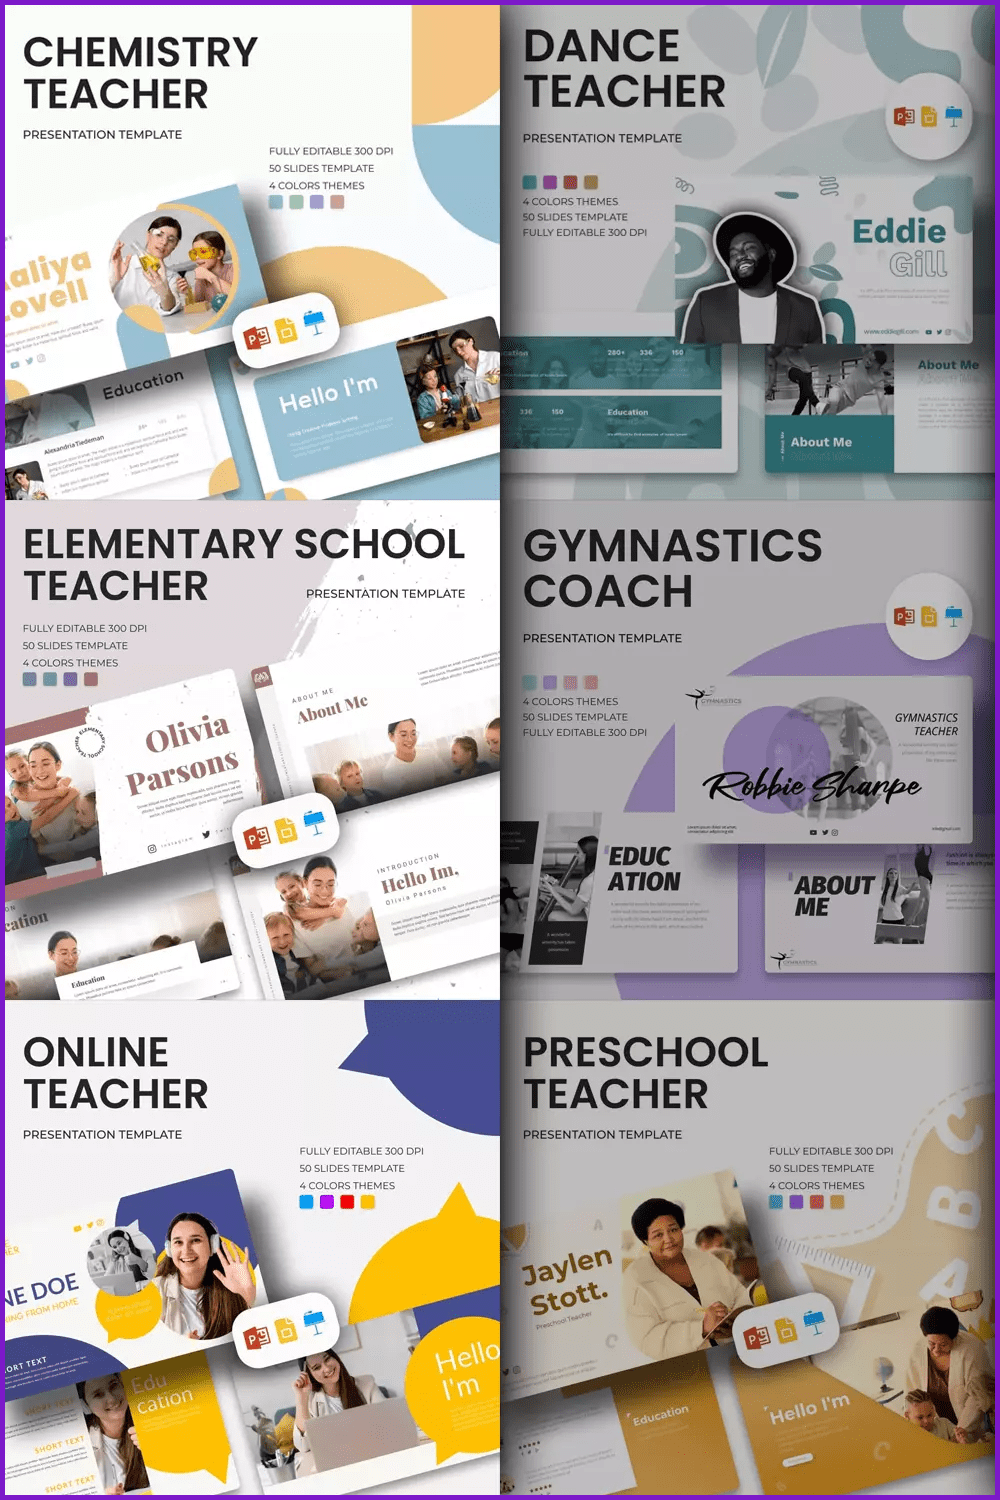 Collage of screenshots of presentations featuring teachers.